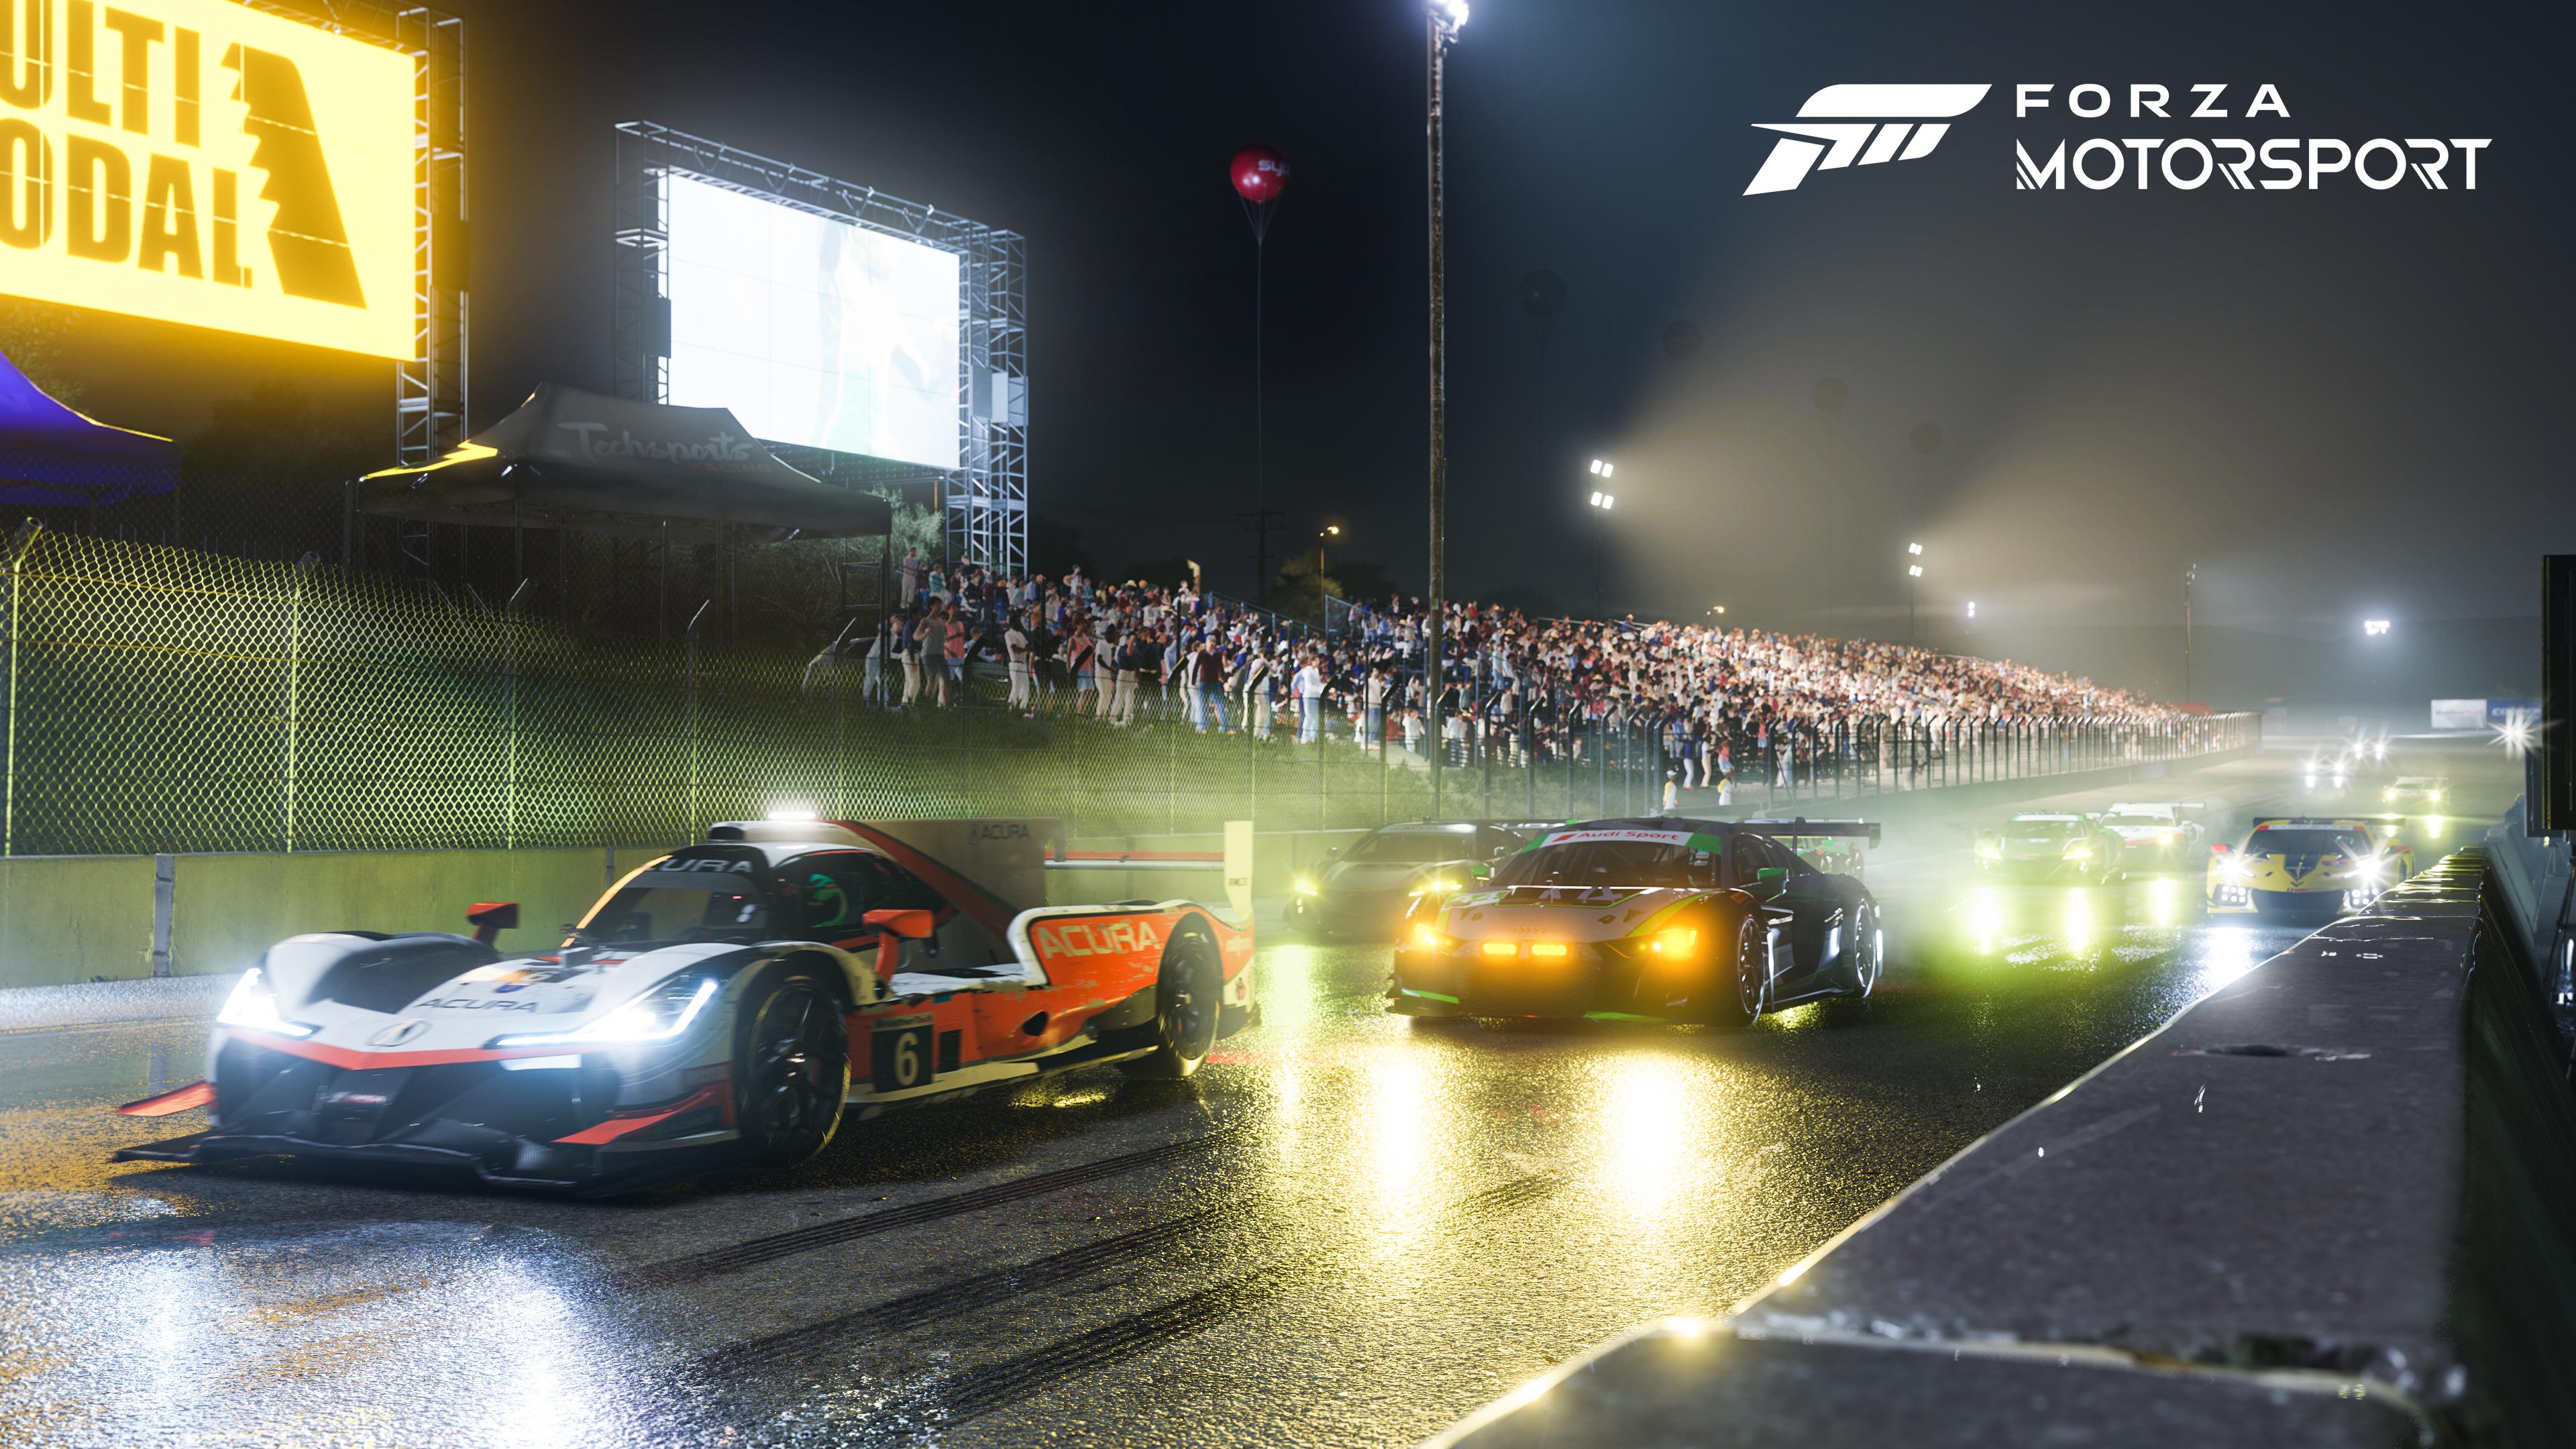 Cars race around a track at night in Forza Motorsport.